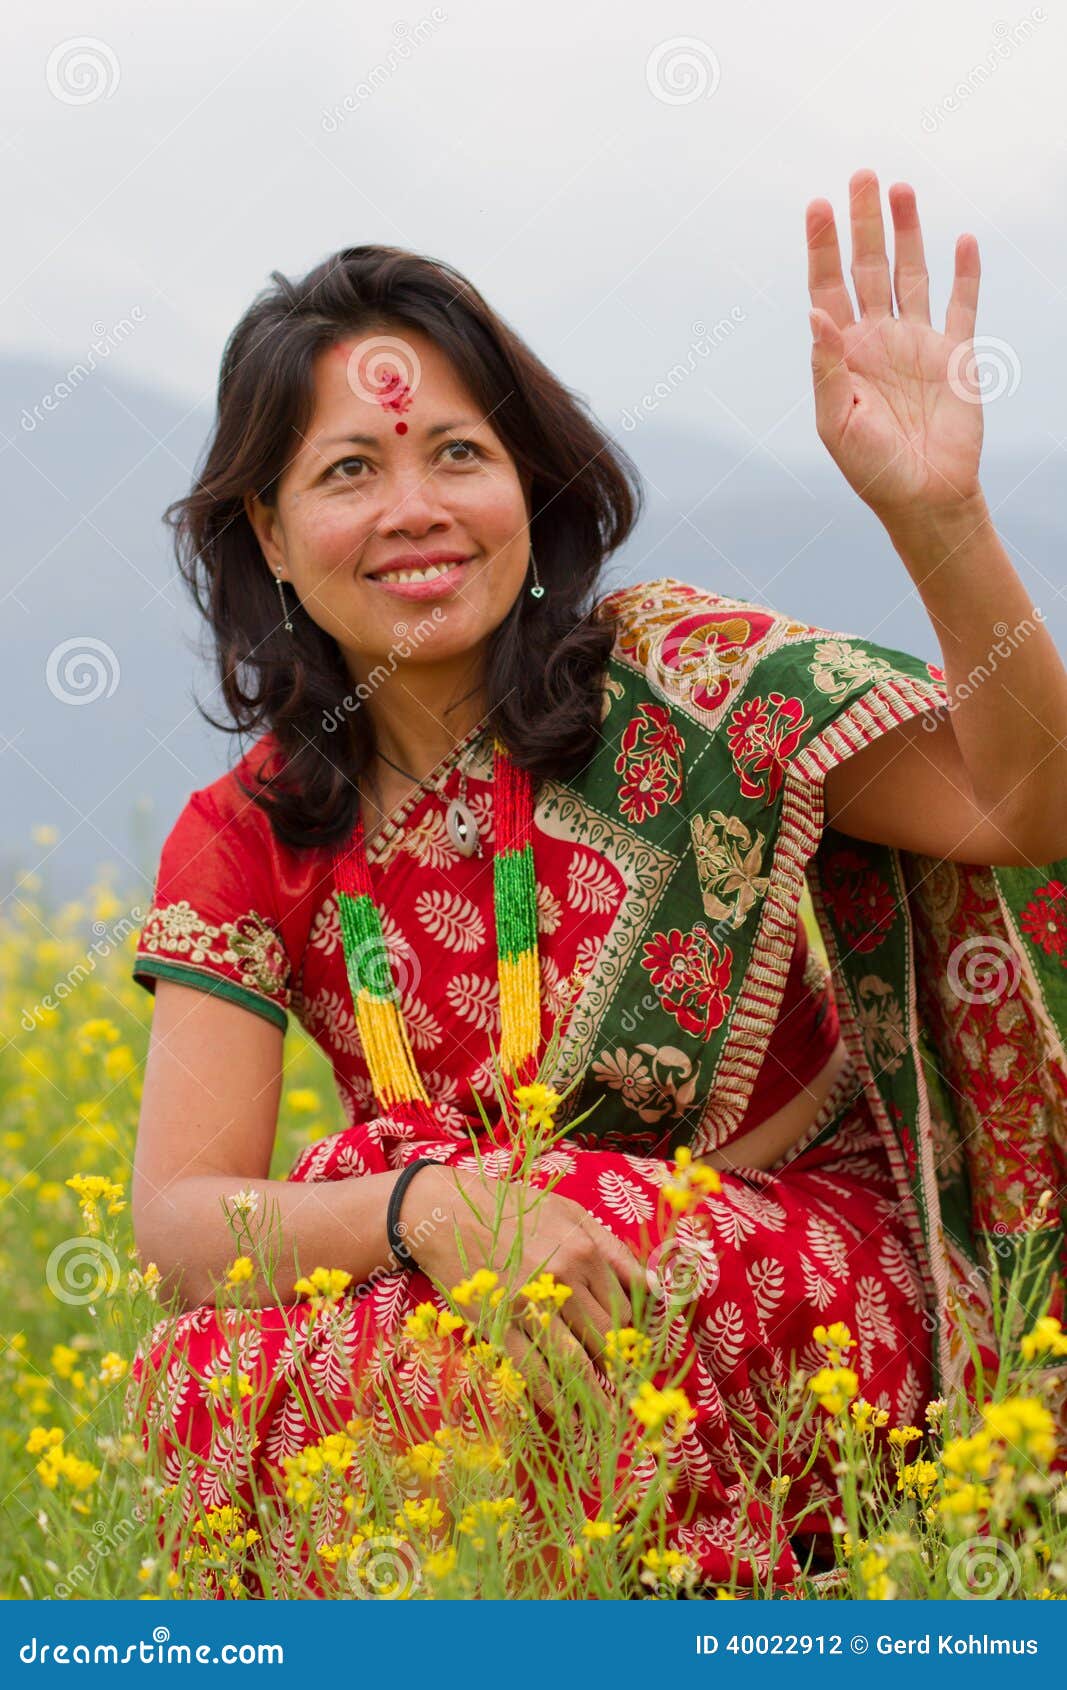 what do you guys think about the indianification of cultural dresses of  nepali ethnic groups? : r/bhattii